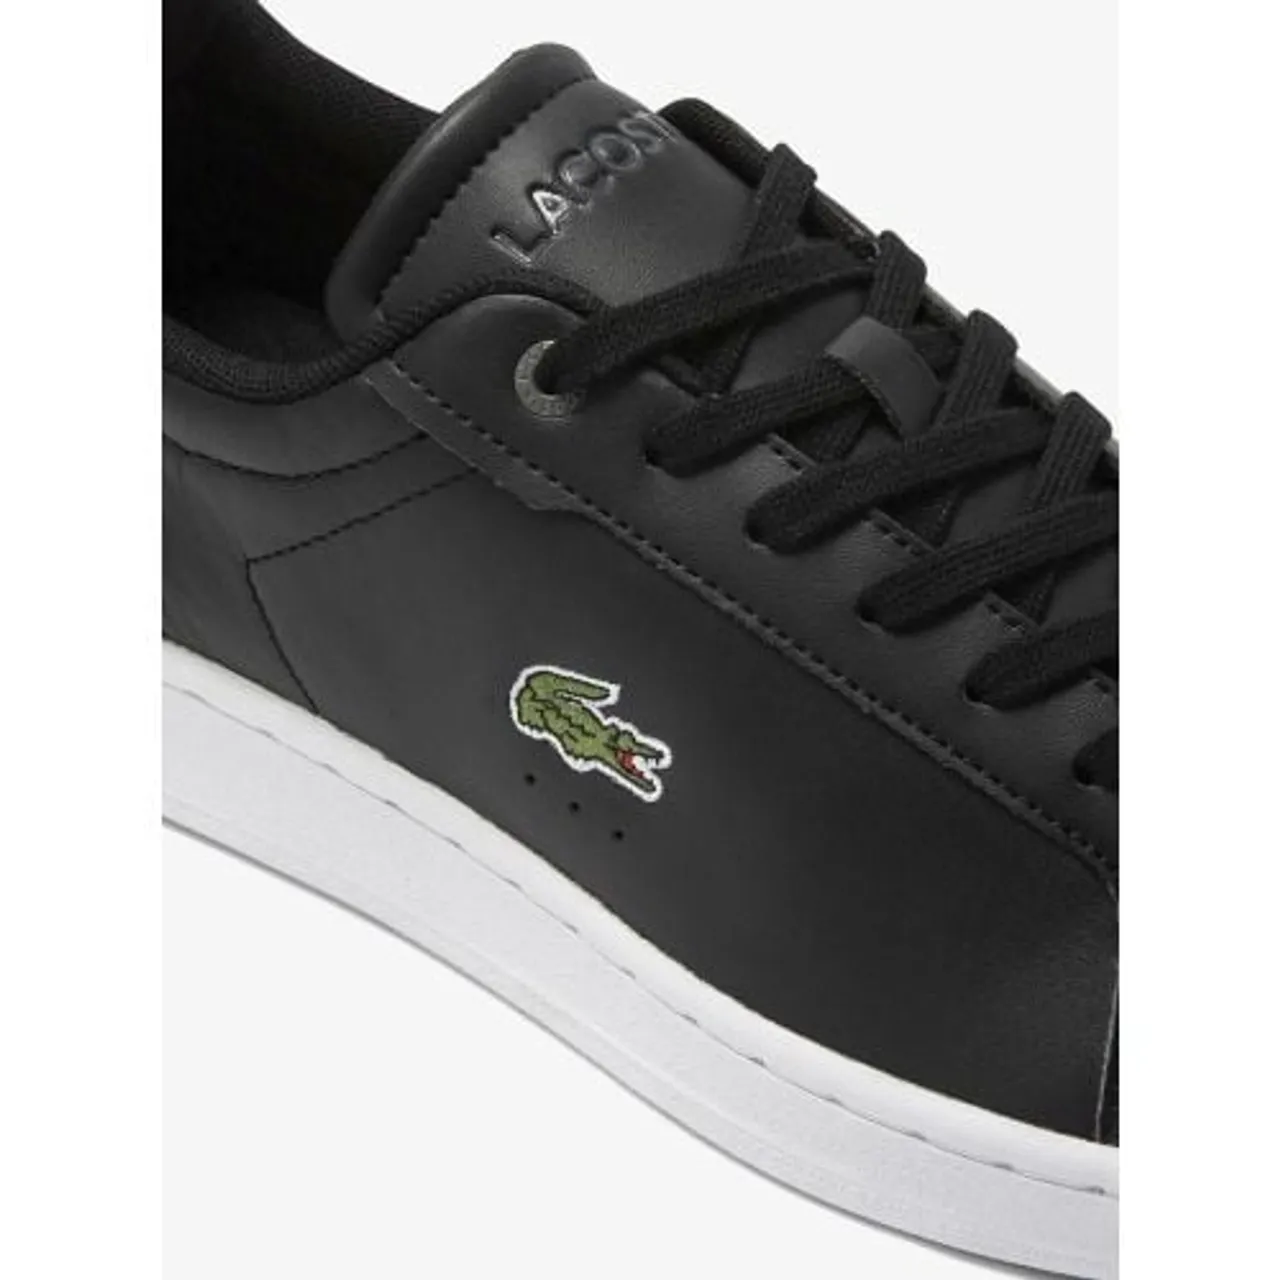 Lacoste Mens Black White Carnaby Pro BL Trainer